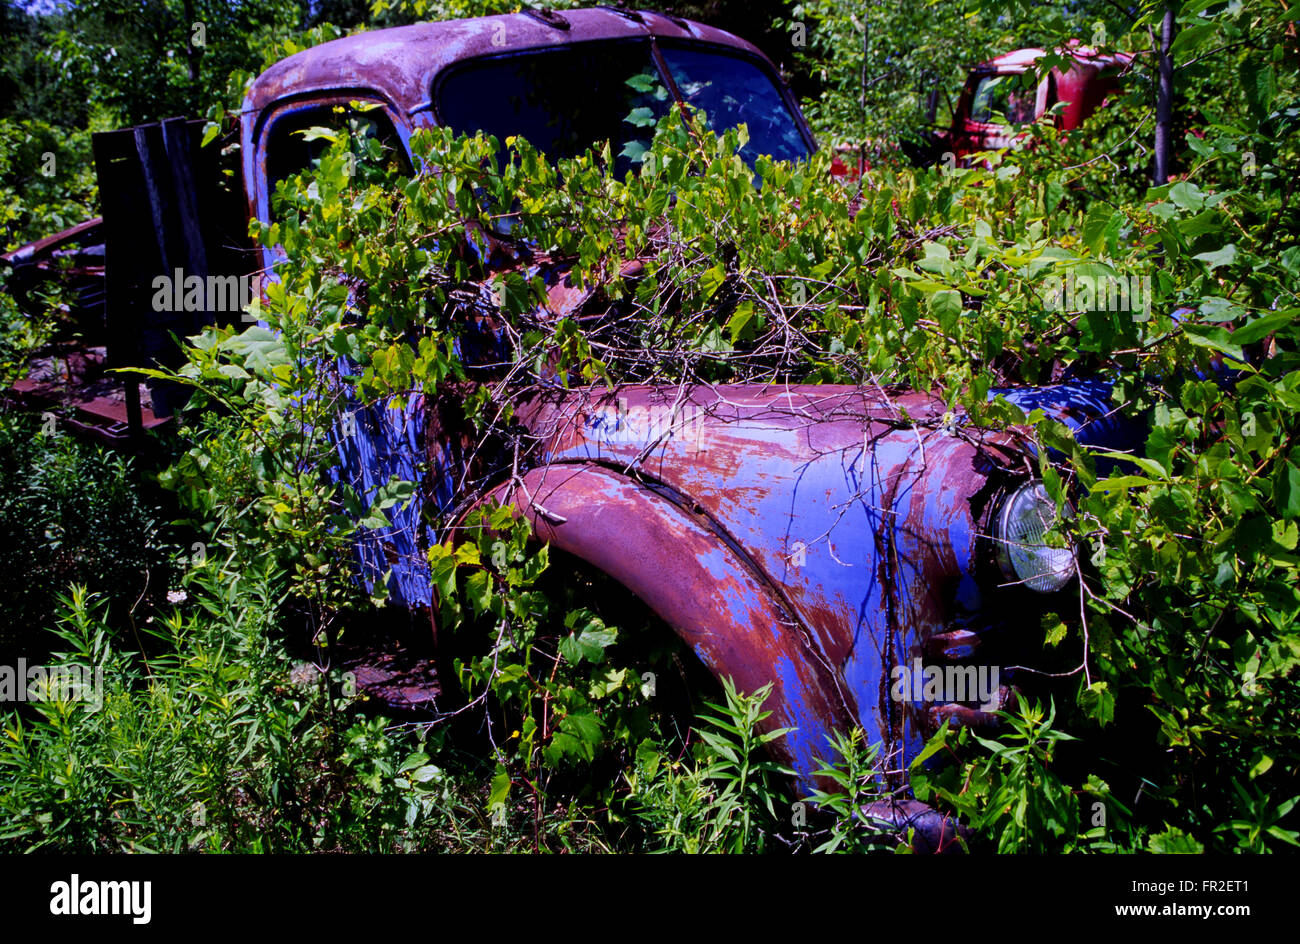 Old abandoned cars and pickup trucks in wrecking yard Stock Photo